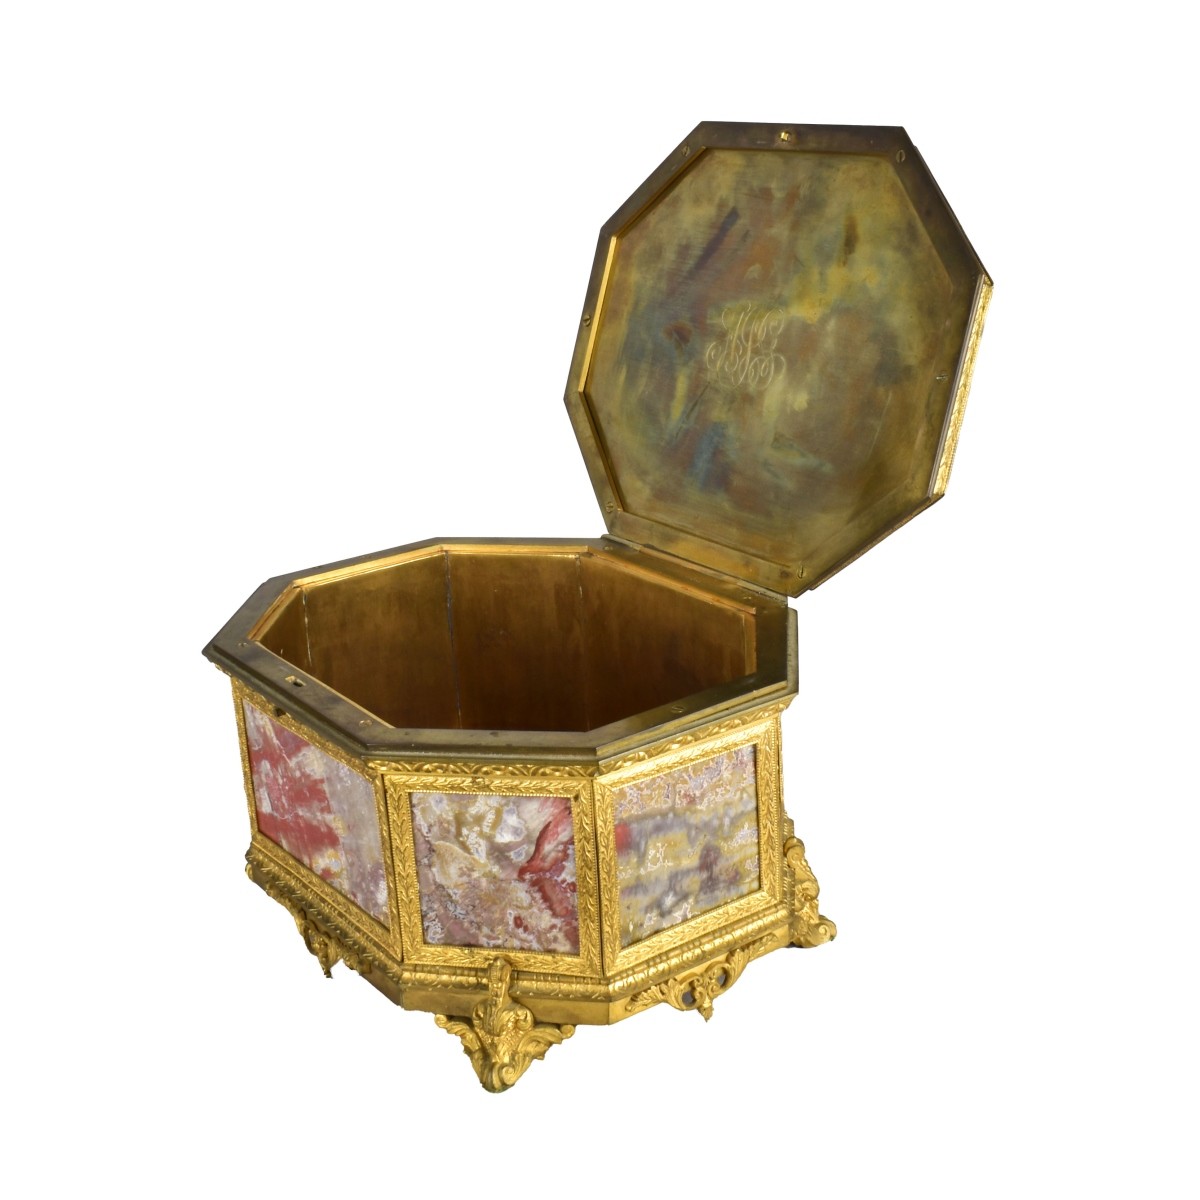 Antique Continental Gilt Bronze and Marble Box